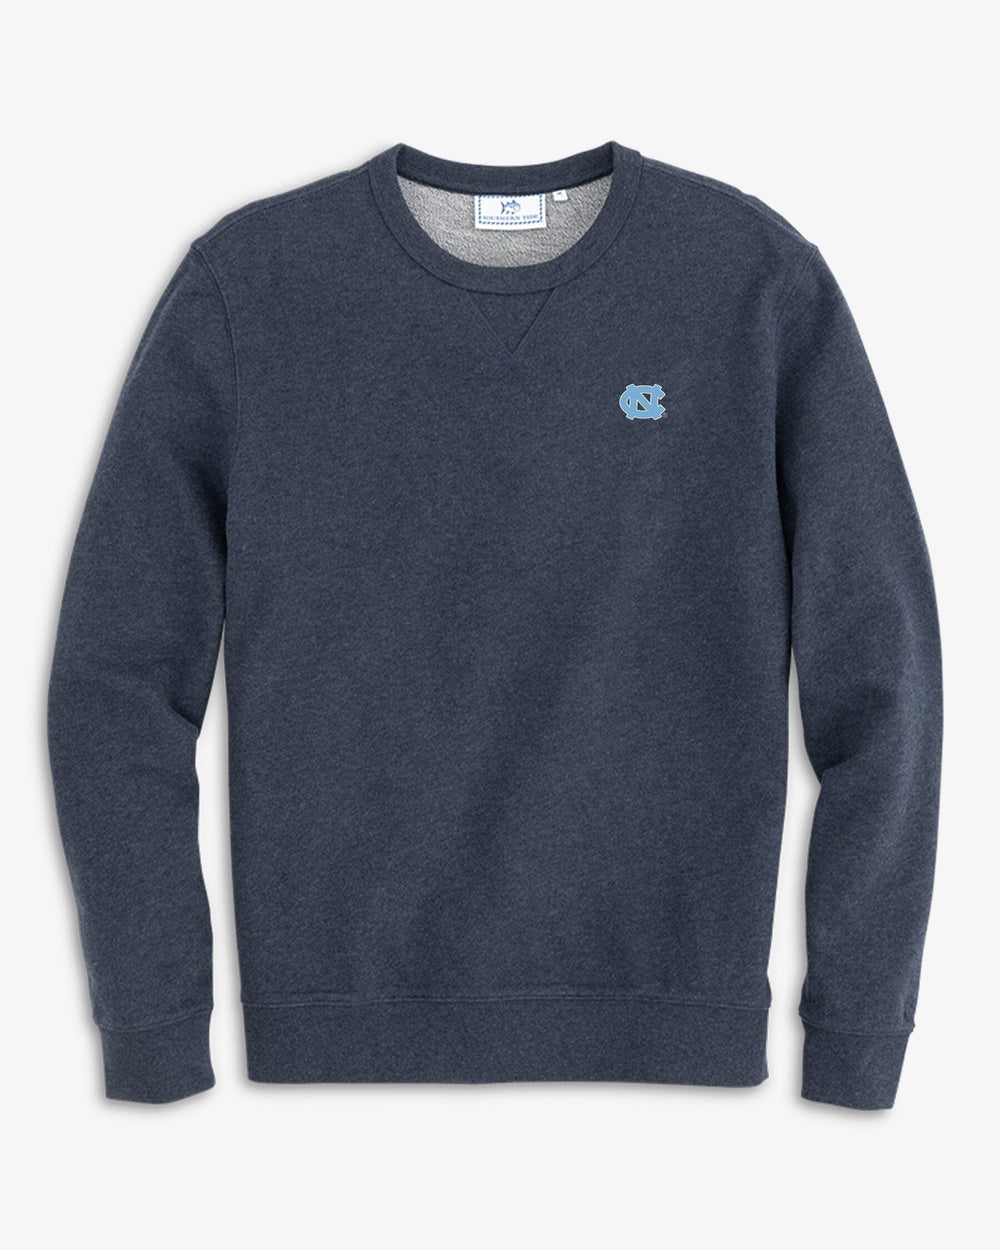 The front view of the North Carolina Tar Heels Upper Deck Pullover Sweatshirt by Southern Tide - Heather Navy